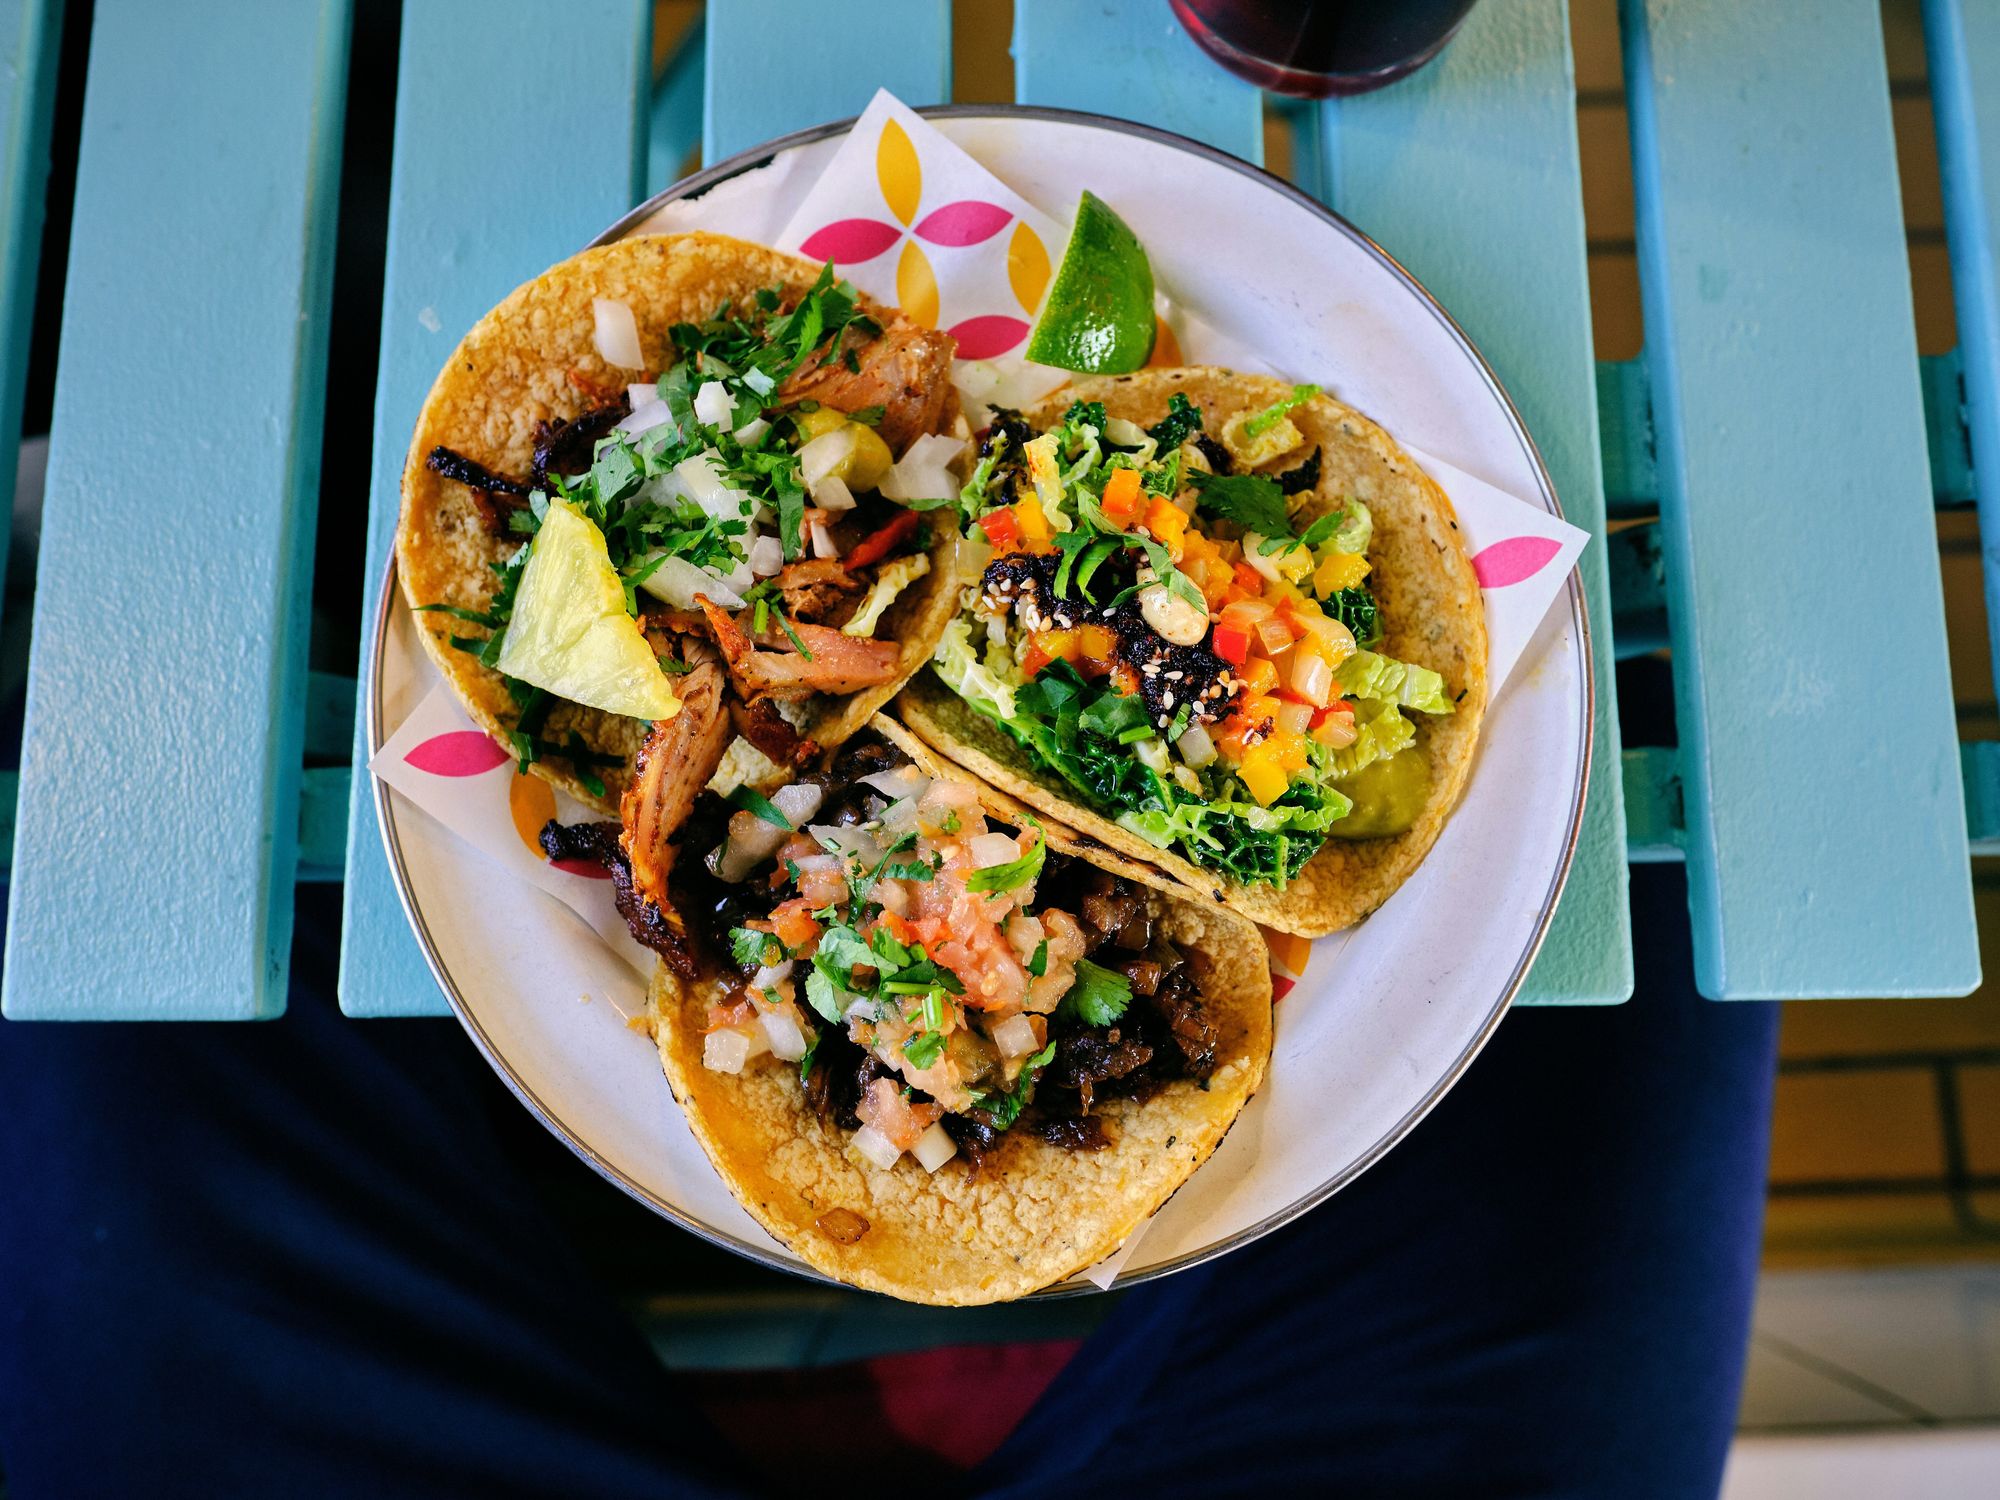 A plate full of tacos with fresh and colorful ingredients